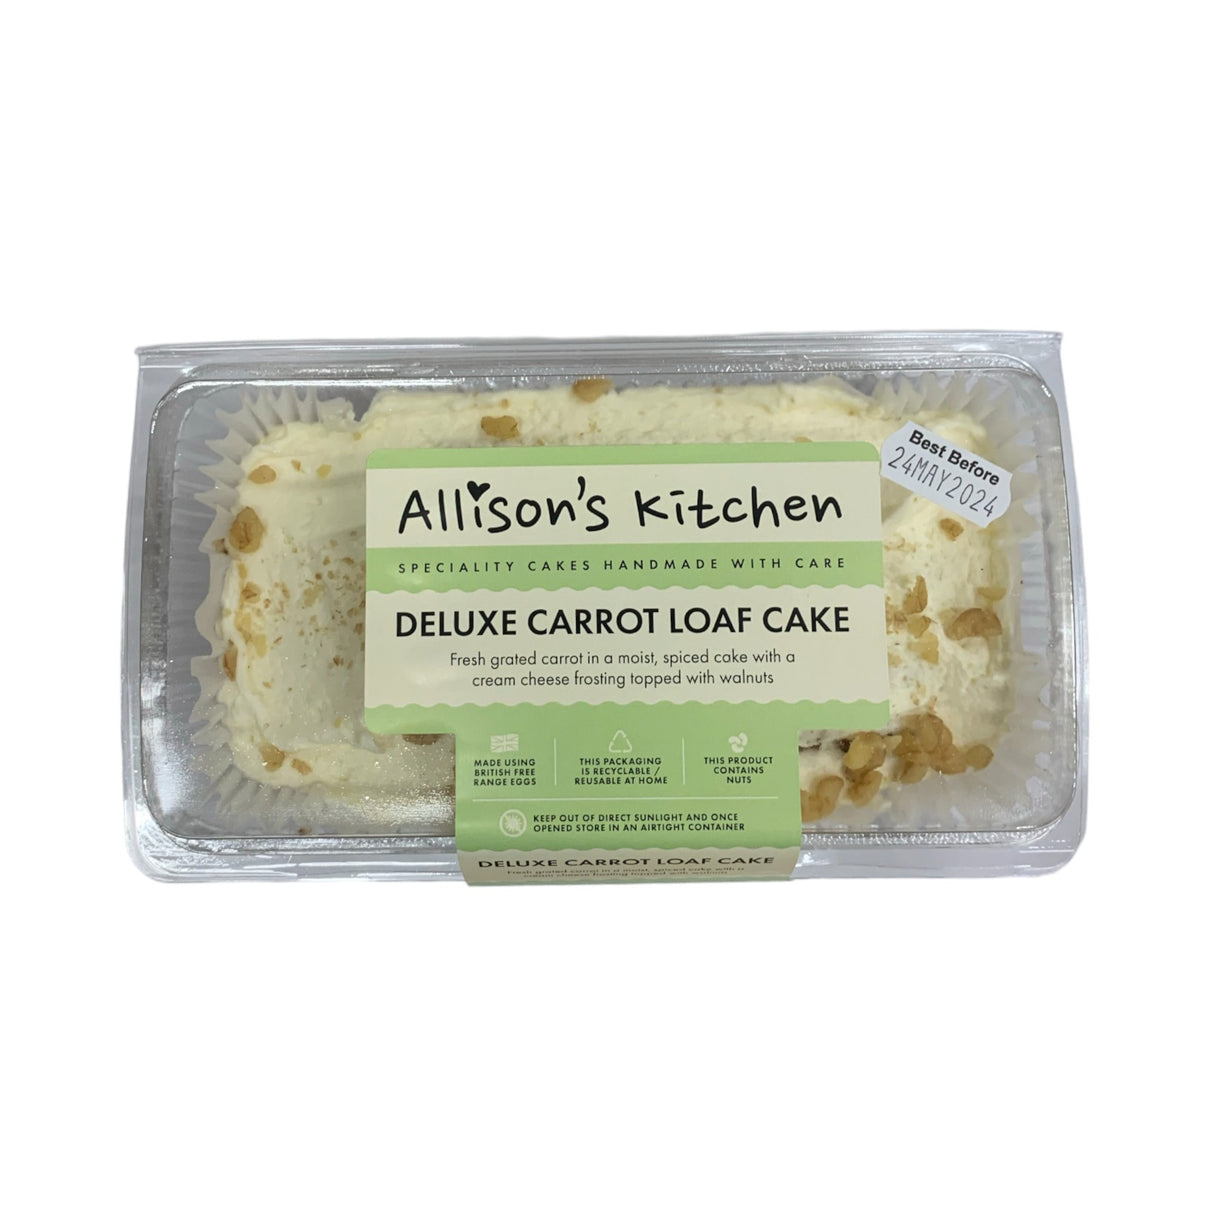 Allison's Kitchen Deluxe Carrot Loaf Cake